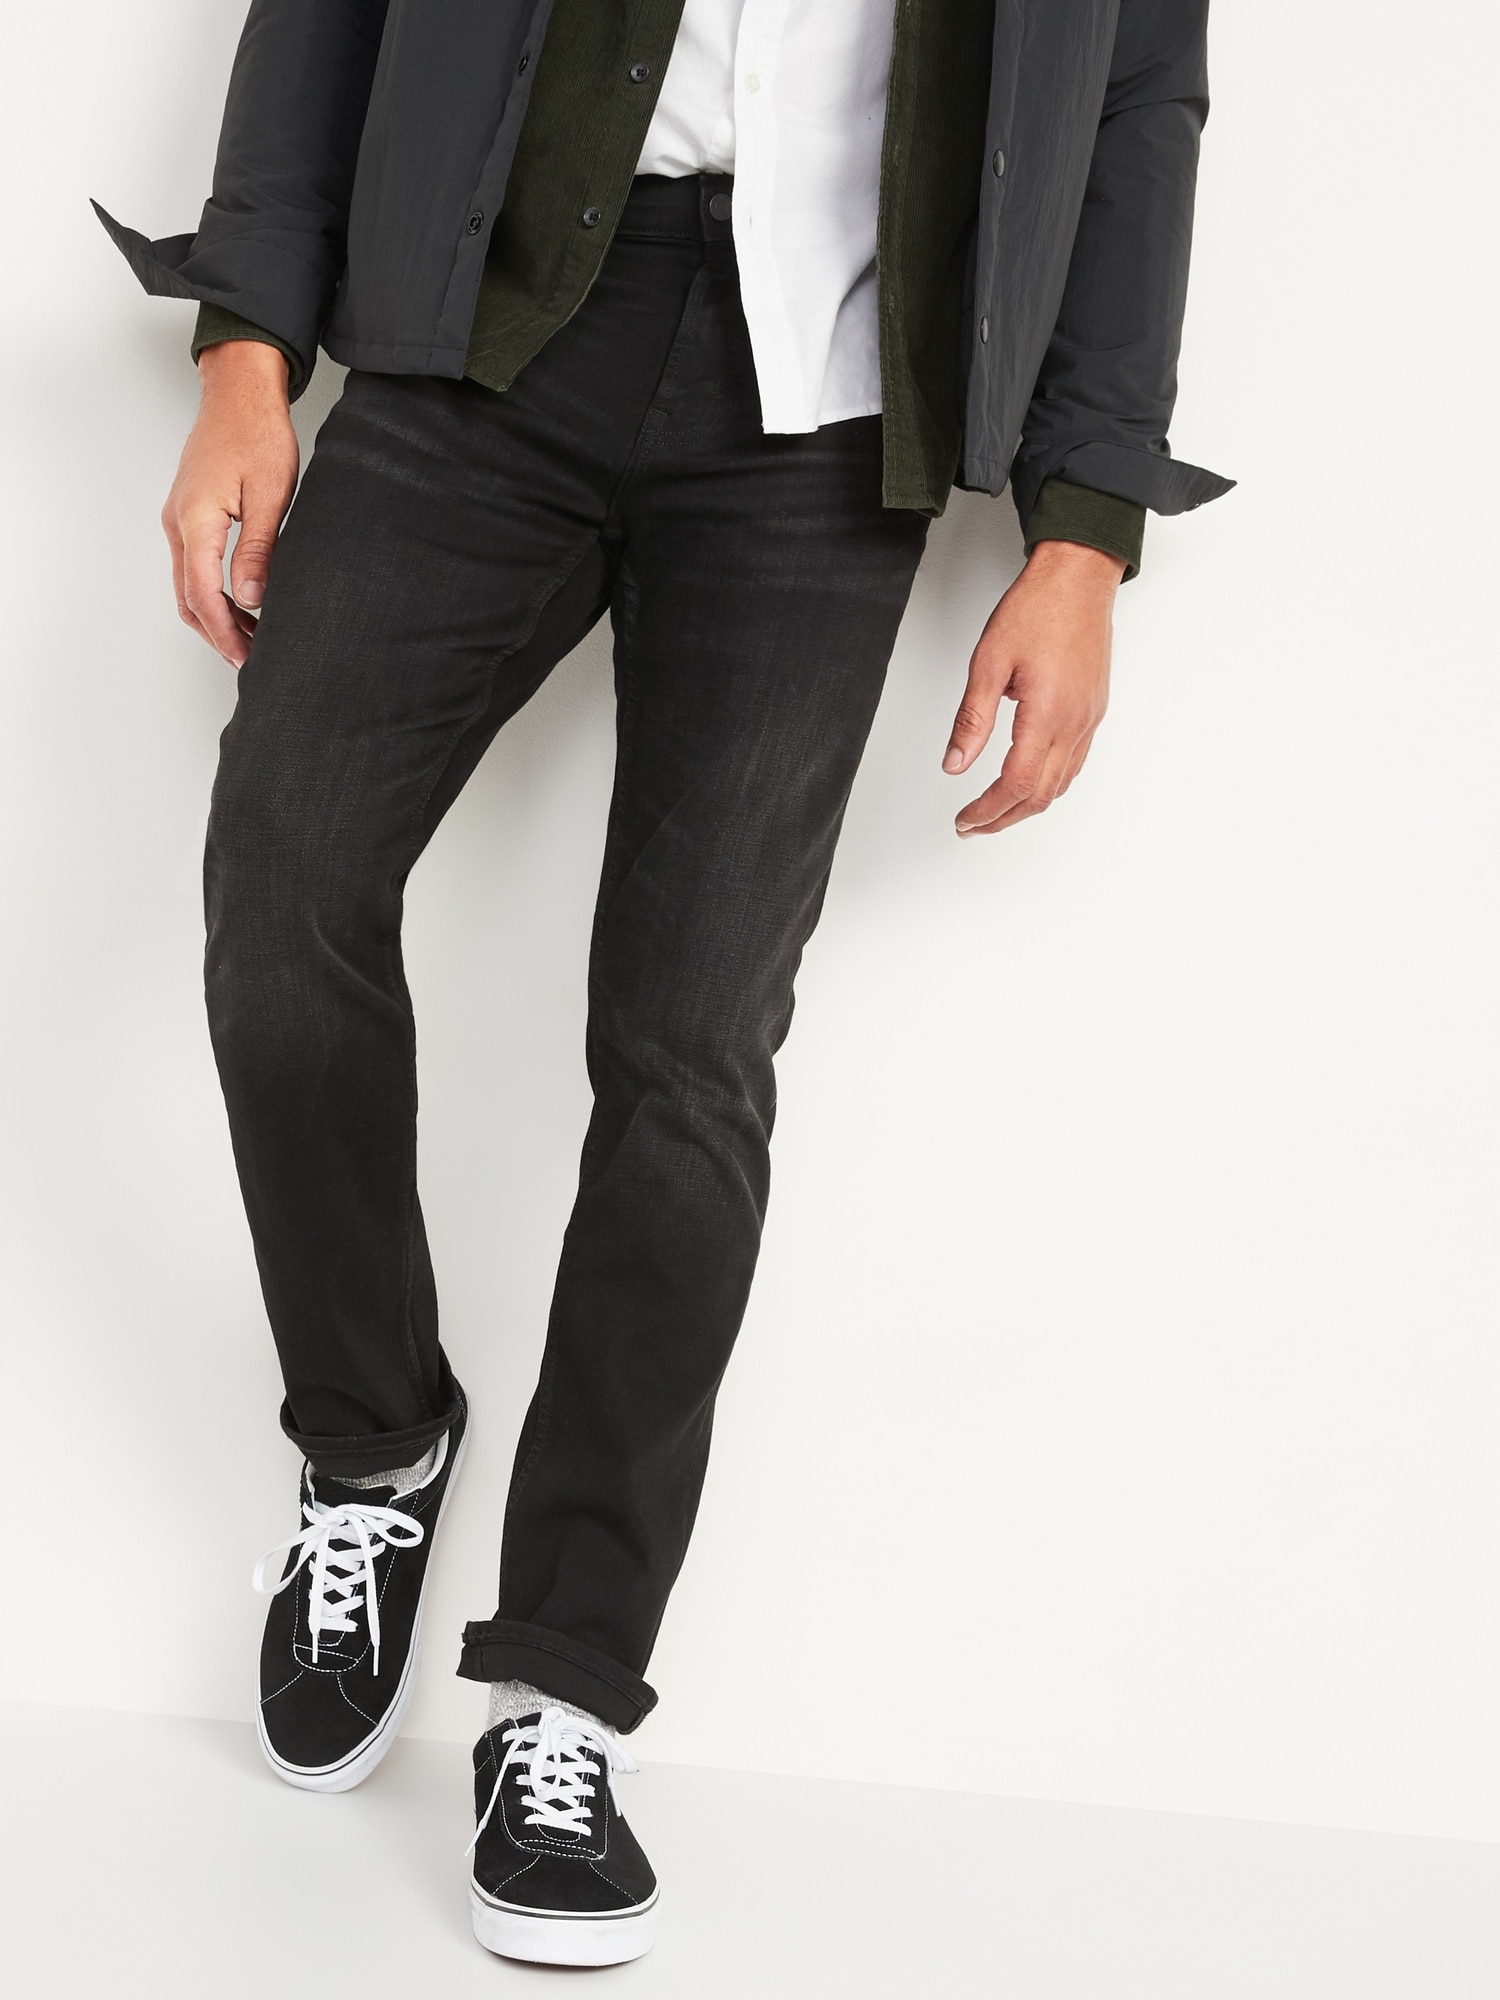 All-New Slim 360° Stretch Performance Black Jeans for Men | Old Navy